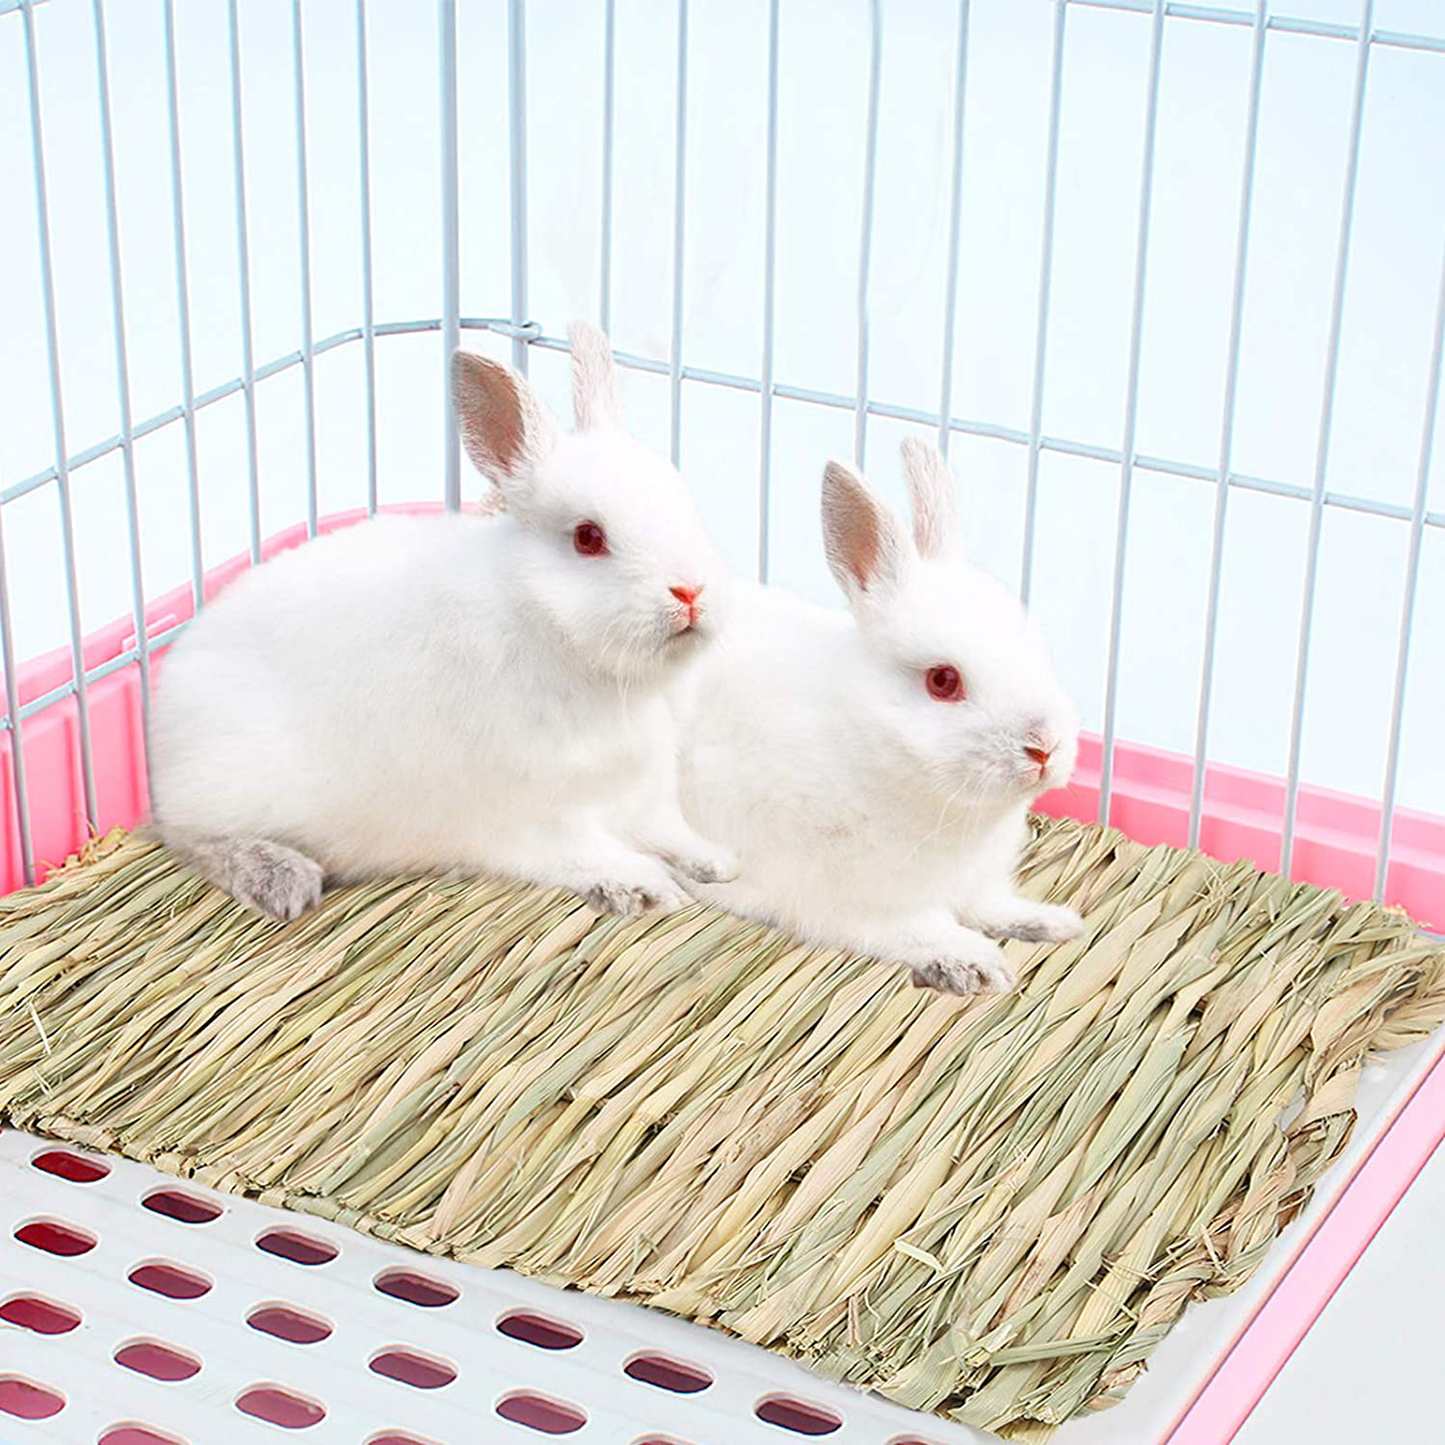 Anyuxin Rabbit Grass Mat - Woven Bed Mat, Bunny Bedding for Small Animals, Natural Straw Woven Bed for Pet Nesting, Nature Hay Mat Chewing Play Toy for Guinea Pig, Hamster, Squirrel and More（3 Pack）